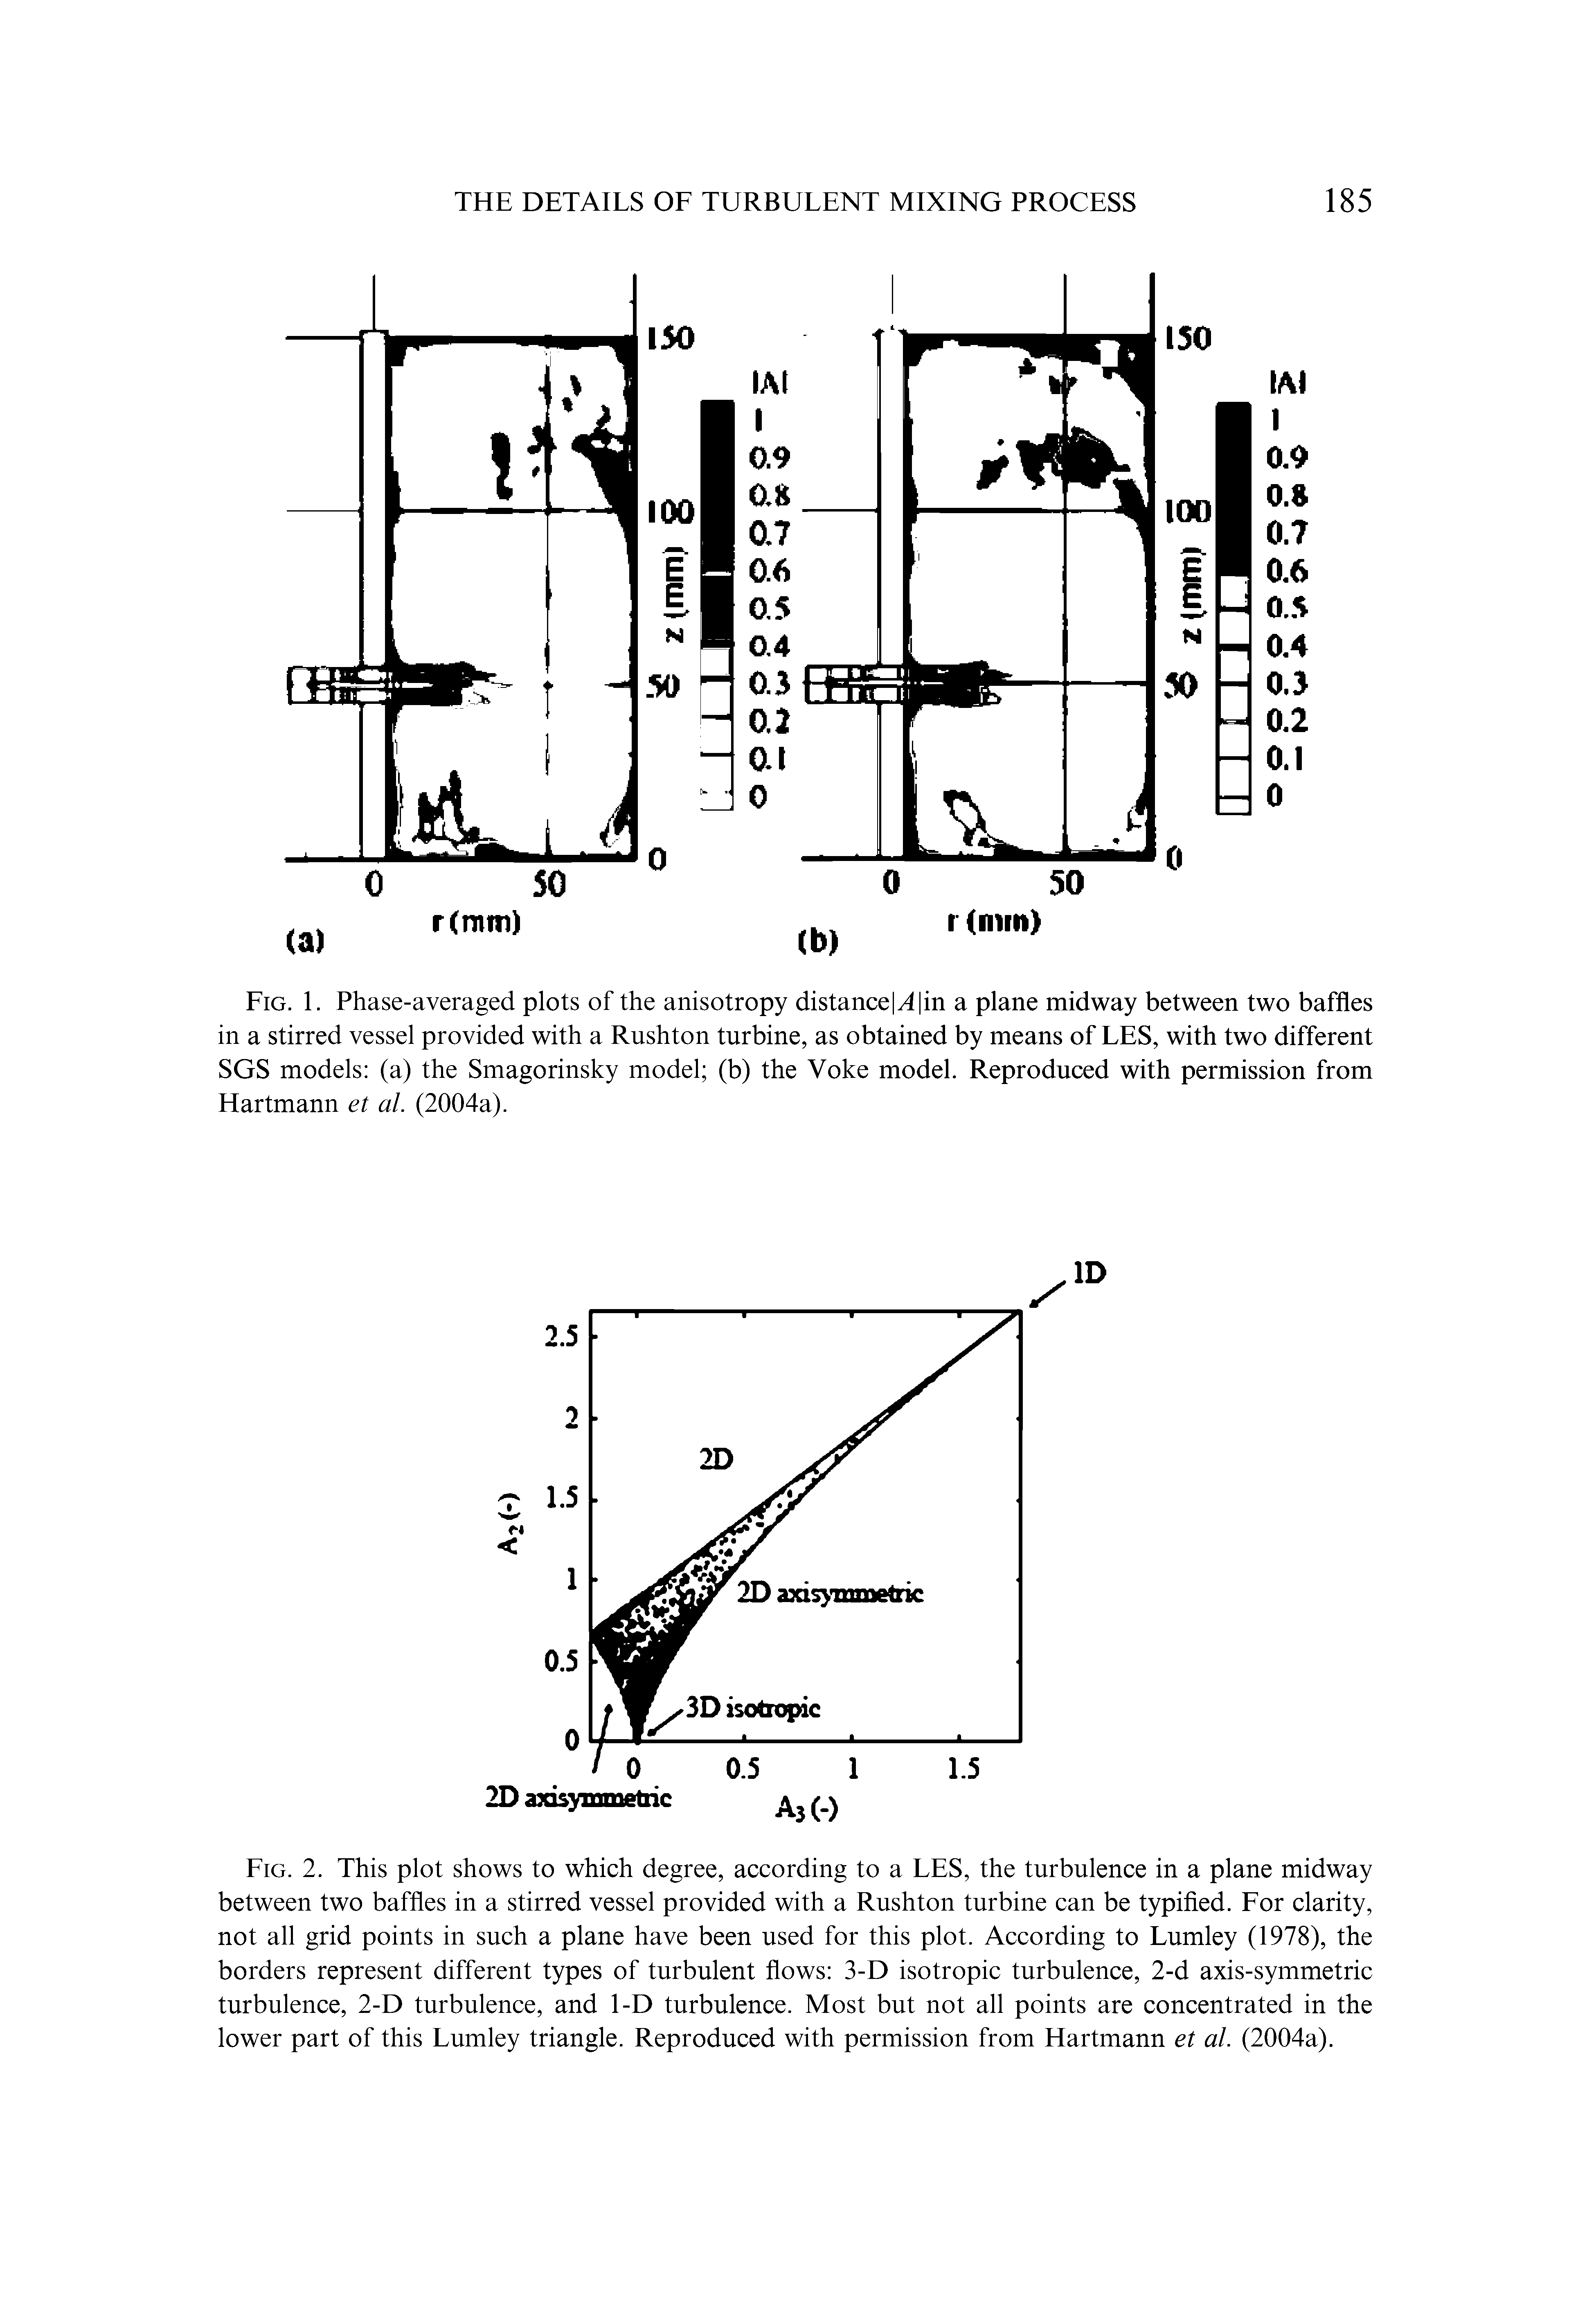 Fig. 2. This plot shows to which degree, according to a LES, the turbulence in a plane midway between two baffles in a stirred vessel provided with a Rushton turbine can be typified. For clarity, not all grid points in such a plane have been used for this plot. According to Lumley (1978), the borders represent different types of turbulent flows 3-D isotropic turbulence, 2-d axis-symmetric turbulence, 2-D turbulence, and 1-D turbulence. Most but not all points are concentrated in the lower part of this Lumley triangle. Reproduced with permission from Hartmann et al. (2004a).